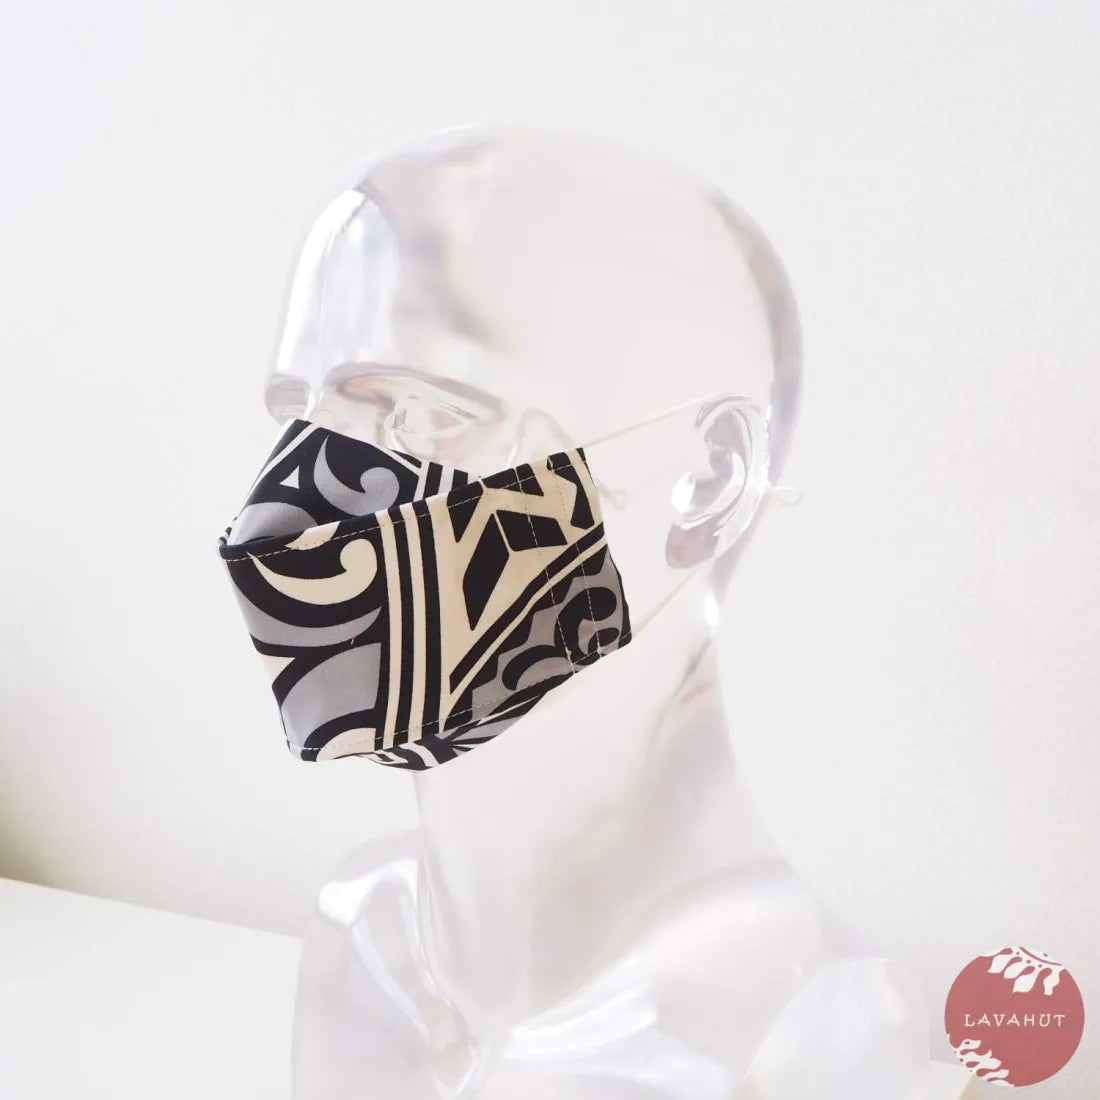 Antimicrobial Silvadur™ + Origami 3d Face Mask • Grey Tribal Tattoo - Made In Hawaii